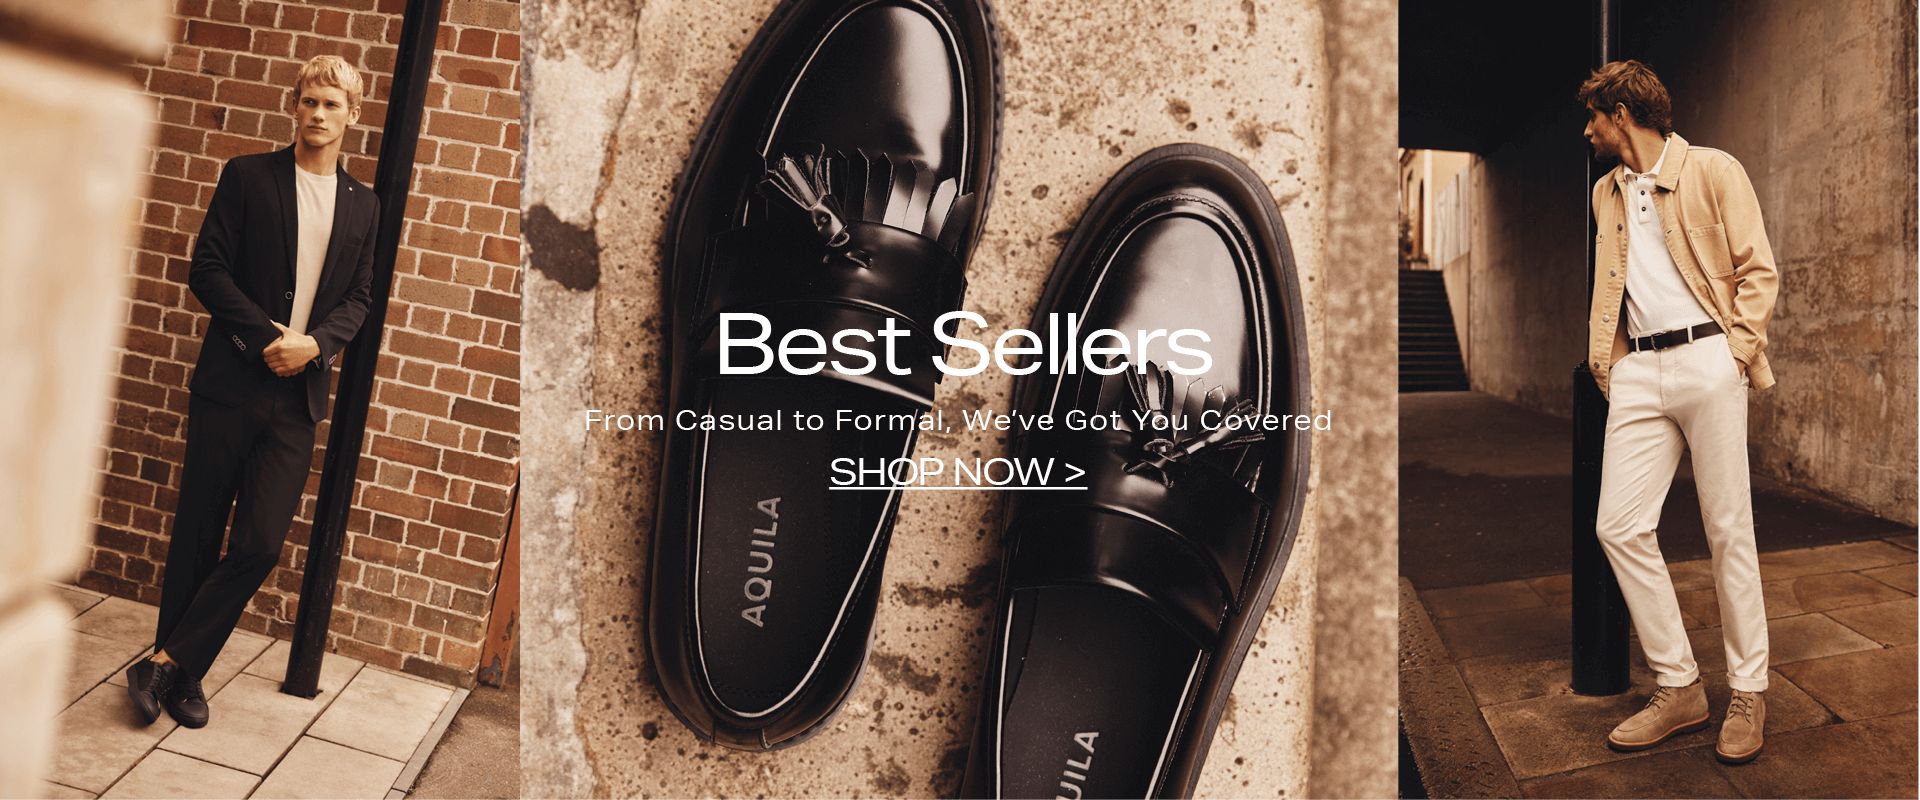 Best Sellers - From Casual to Formal, We've Got You Covered.